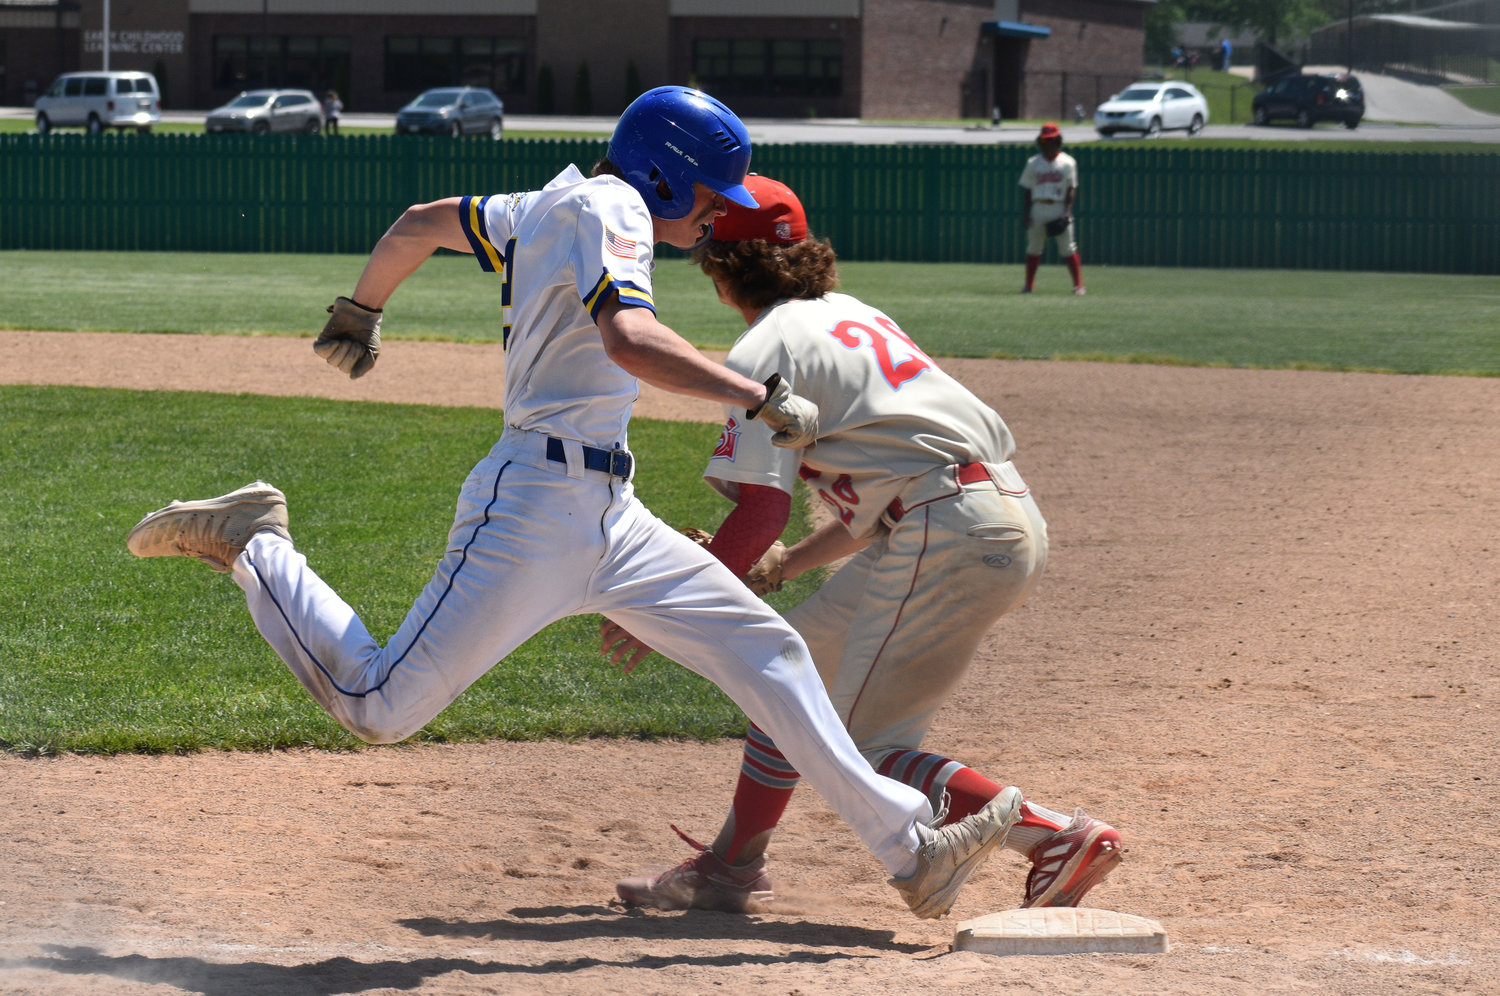 Junior Jake Banner beats a throw to first base in the Liberator’s game against Glendale on Thursday, May 12.